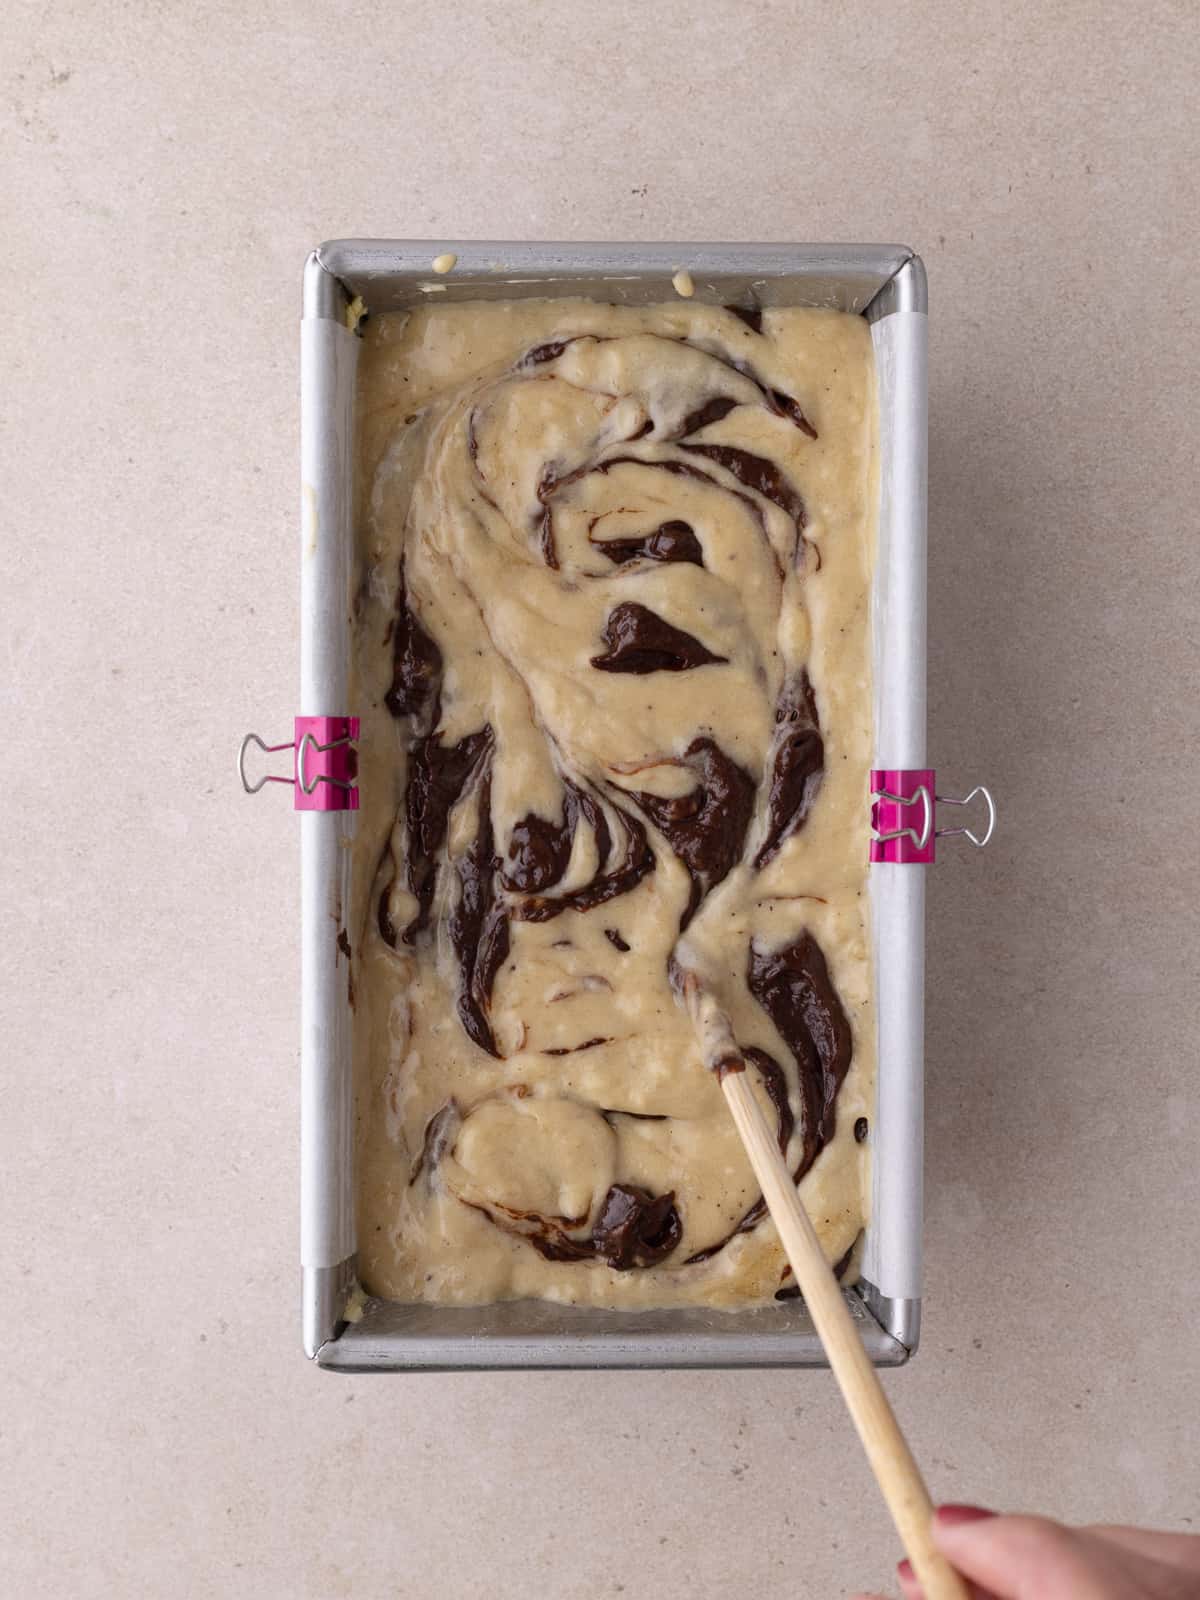 Chopstick swirling banana batter and chocolate batter together in loaf pan.